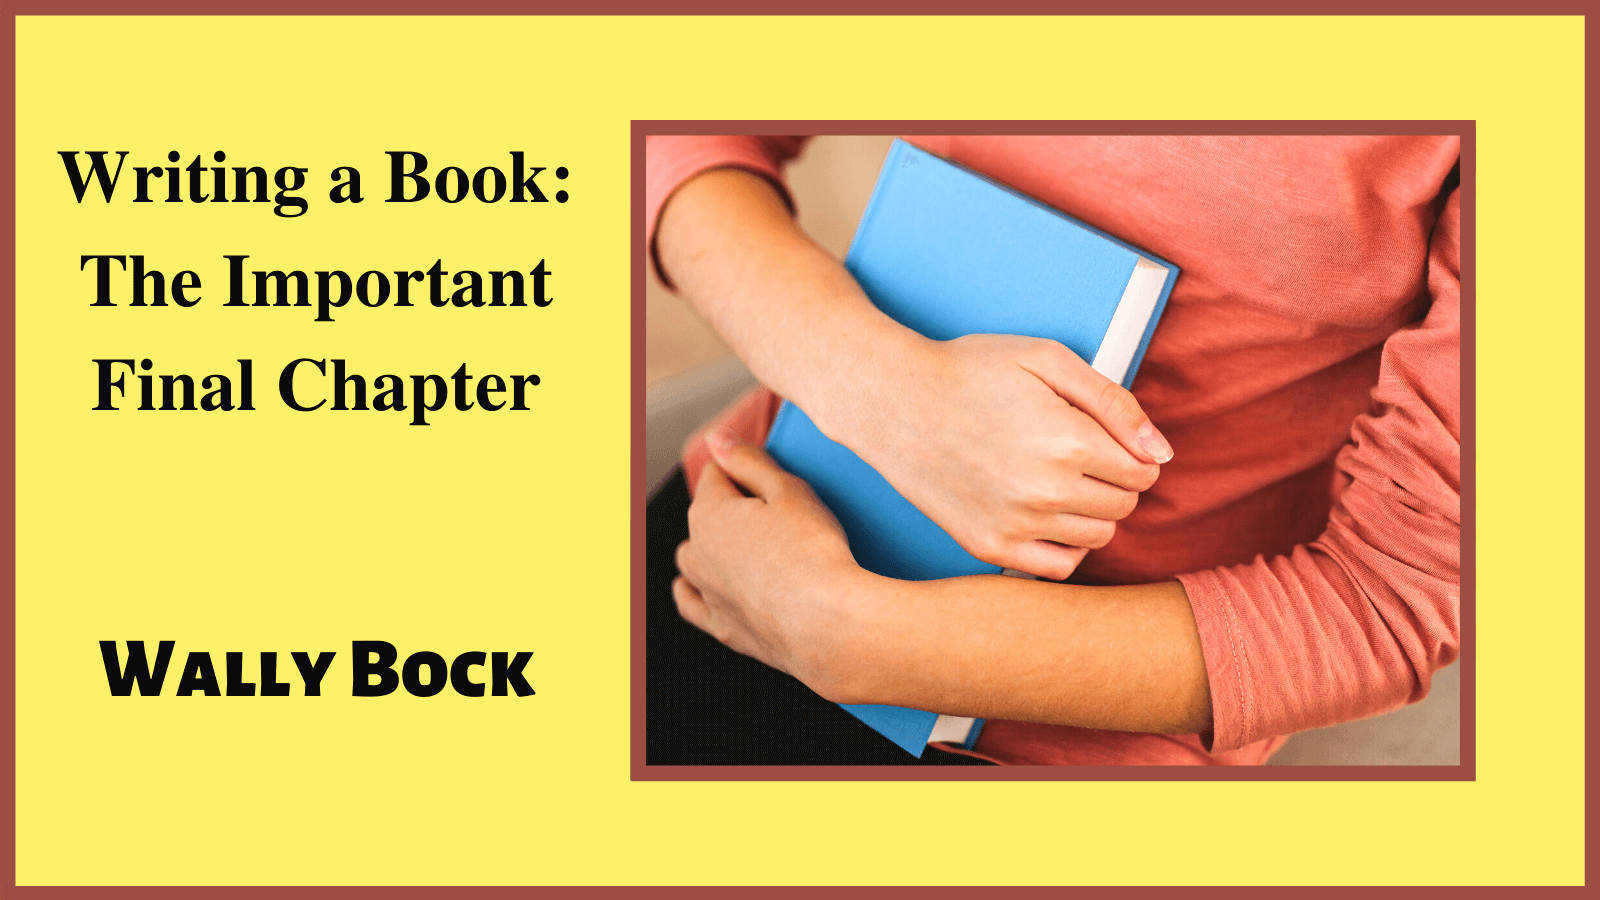 Writing a Book: The Important Final Chapter